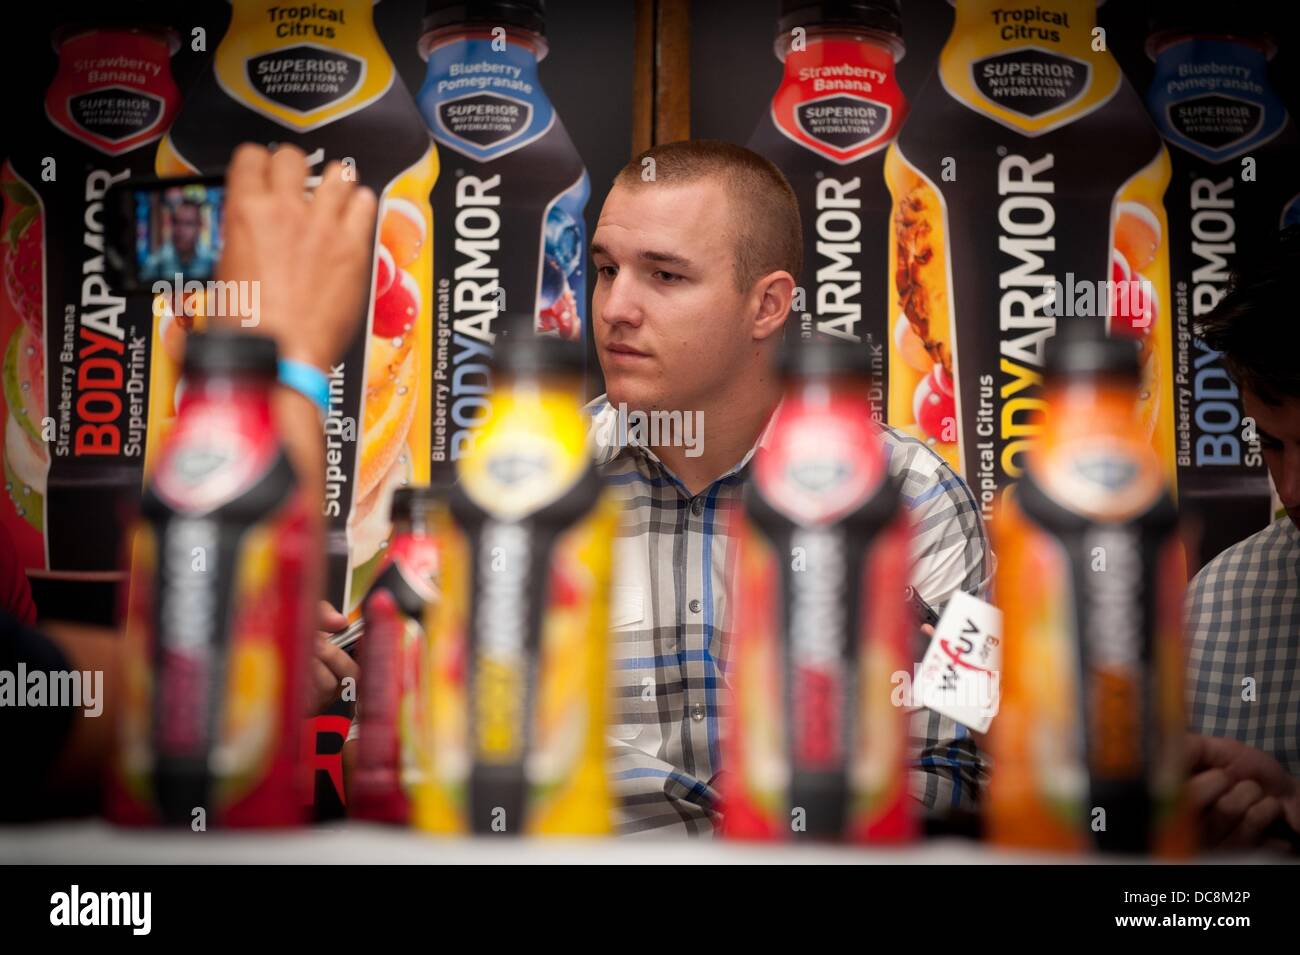 Manhattan, New York, USA. 12th Aug, 2013. Los Angeles Angels of Anaheim outfielder MIKE TROUT speaks with the media at Foley's NY Pub & Restaurant on 33rd Street, Monday, August 12, 2013. Credit:  Bryan Smith/ZUMAPRESS.com/Alamy Live News Stock Photo